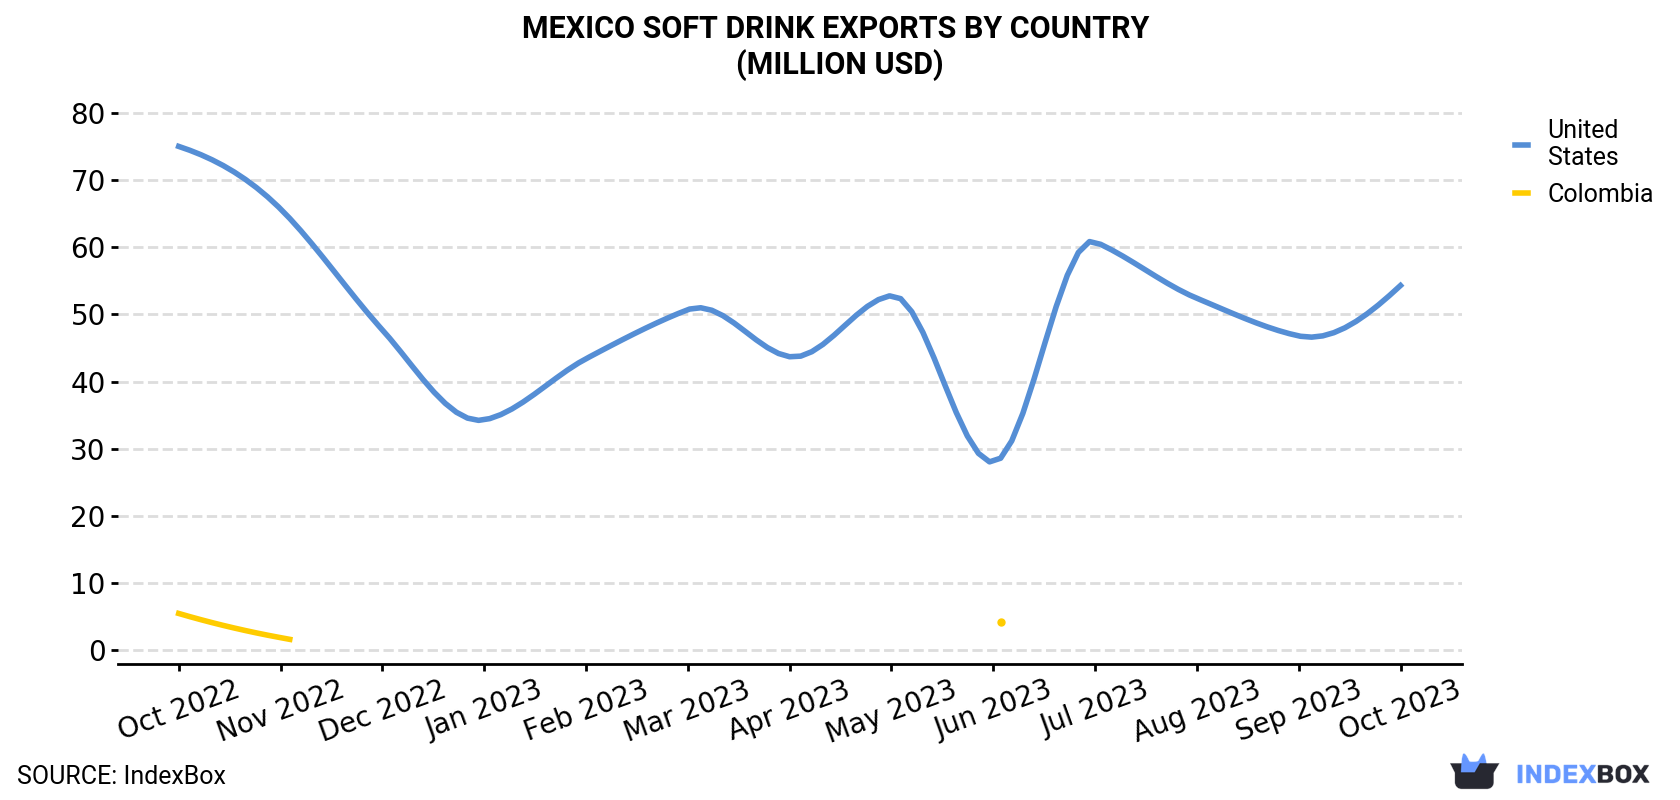 Mexico Soft Drink Exports By Country (Million USD)